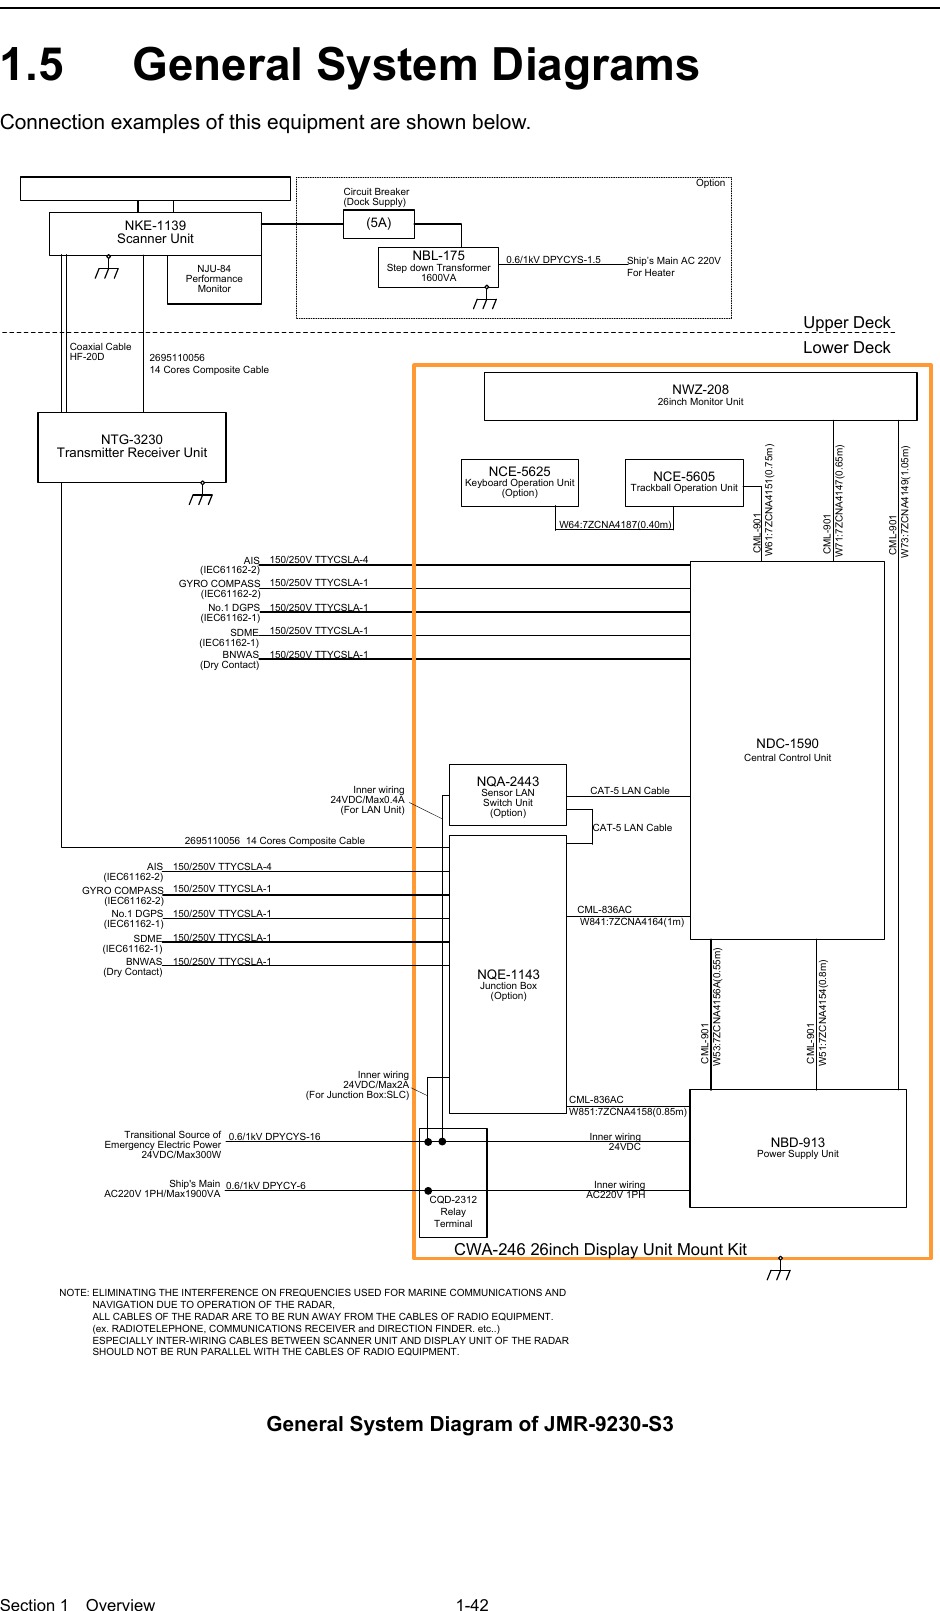  Section 1  Overview 1-42  1.5  General System Diagrams   Connection examples of this equipment are shown below.  150/250V TTYCSLA-4AIS(IEC61162-2)GYRO COMPASS(IEC61162-2)No.1 DGPS(IEC61162-1)SDME(IEC61162-1)BNWAS(Dry Contact)CML-836ACW851:7ZCNA4158(0.85m)CML-836AC W841:7ZCNA4164(1m)CAT-5 LAN CableNQE-1143Junction Box(Option)Upper DeckLower DeckNKE-1139Scanner UnitNCE-5605Trackball Operation UnitNBD-913Power Supply UnitNJU-84Performance Monitor2695110056  14 Cores Composite CableNOTE: ELIMINATING THE INTERFERENCE ON FREQUENCIES USED FOR MARINE COMMUNICATIONS AND             NAVIGATION DUE TO OPERATION OF THE RADAR,            ALL CABLES OF THE RADAR ARE TO BE RUN AWAY FROM THE CABLES OF RADIO EQUIPMENT.            (ex. RADIOTELEPHONE, COMMUNICATIONS RECEIVER and DIRECTION FINDER. etc..)            ESPECIALLY INTER-WIRING CABLES BETWEEN SCANNER UNIT AND DISPLAY UNIT OF THE RADAR             SHOULD NOT BE RUN PARALLEL WITH THE CABLES OF RADIO EQUIPMENT.150/250V TTYCSLA-1150/250V TTYCSLA-1150/250V TTYCSLA-1150/250V TTYCSLA-1NWZ-20826inch Monitor Unit CML-901 W71:7ZCNA4147(0.65m) CML-901 W61:7ZCNA4151(0.75m) CML-901 W73:7ZCNA4149(1.05m)(5A)NBL-175Step down Transformer1600VA 0.6/1kV DPYCYS-1.5Ship’s Main AC 220VFor HeaterCircuit Breaker(Dock Supply)OptionNTG-3230Transmitter Receiver UnitNCE-5625Keyboard Operation Unit(Option)W64:7ZCNA4187(0.40m)CWA-246 26inch Display Unit Mount KitCoaxial CableHF-20D150/250V TTYCSLA-4AIS(IEC61162-2)GYRO COMPASS(IEC61162-2)No.1 DGPS(IEC61162-1)SDME(IEC61162-1)BNWAS(Dry Contact)150/250V TTYCSLA-1150/250V TTYCSLA-1150/250V TTYCSLA-1150/250V TTYCSLA-12695110056  14 Cores Composite CableCAT-5 LAN CableNDC-1590Central Control Unit CML-901W53:7ZCNA4156A(0.55m) CML-901W51:7ZCNA4154(0.8m)NQA-2443Sensor LAN Switch Unit(Option)Inner wiring24VDC/Max2A(For Junction Box:SLC)Inner wiring 24VDC/Max0.4A(For LAN Unit)CQD-2312Relay TerminalTransitional Source of Emergency Electric Power 24VDC/Max300W 0.6/1kV DPYCYS-16 0.6/1kV DPYCY-6Ship&apos;s MainAC220V 1PH/Max1900VAInner wiring24VDCInner wiringAC220V 1PH General System Diagram of JMR-9230-S3   